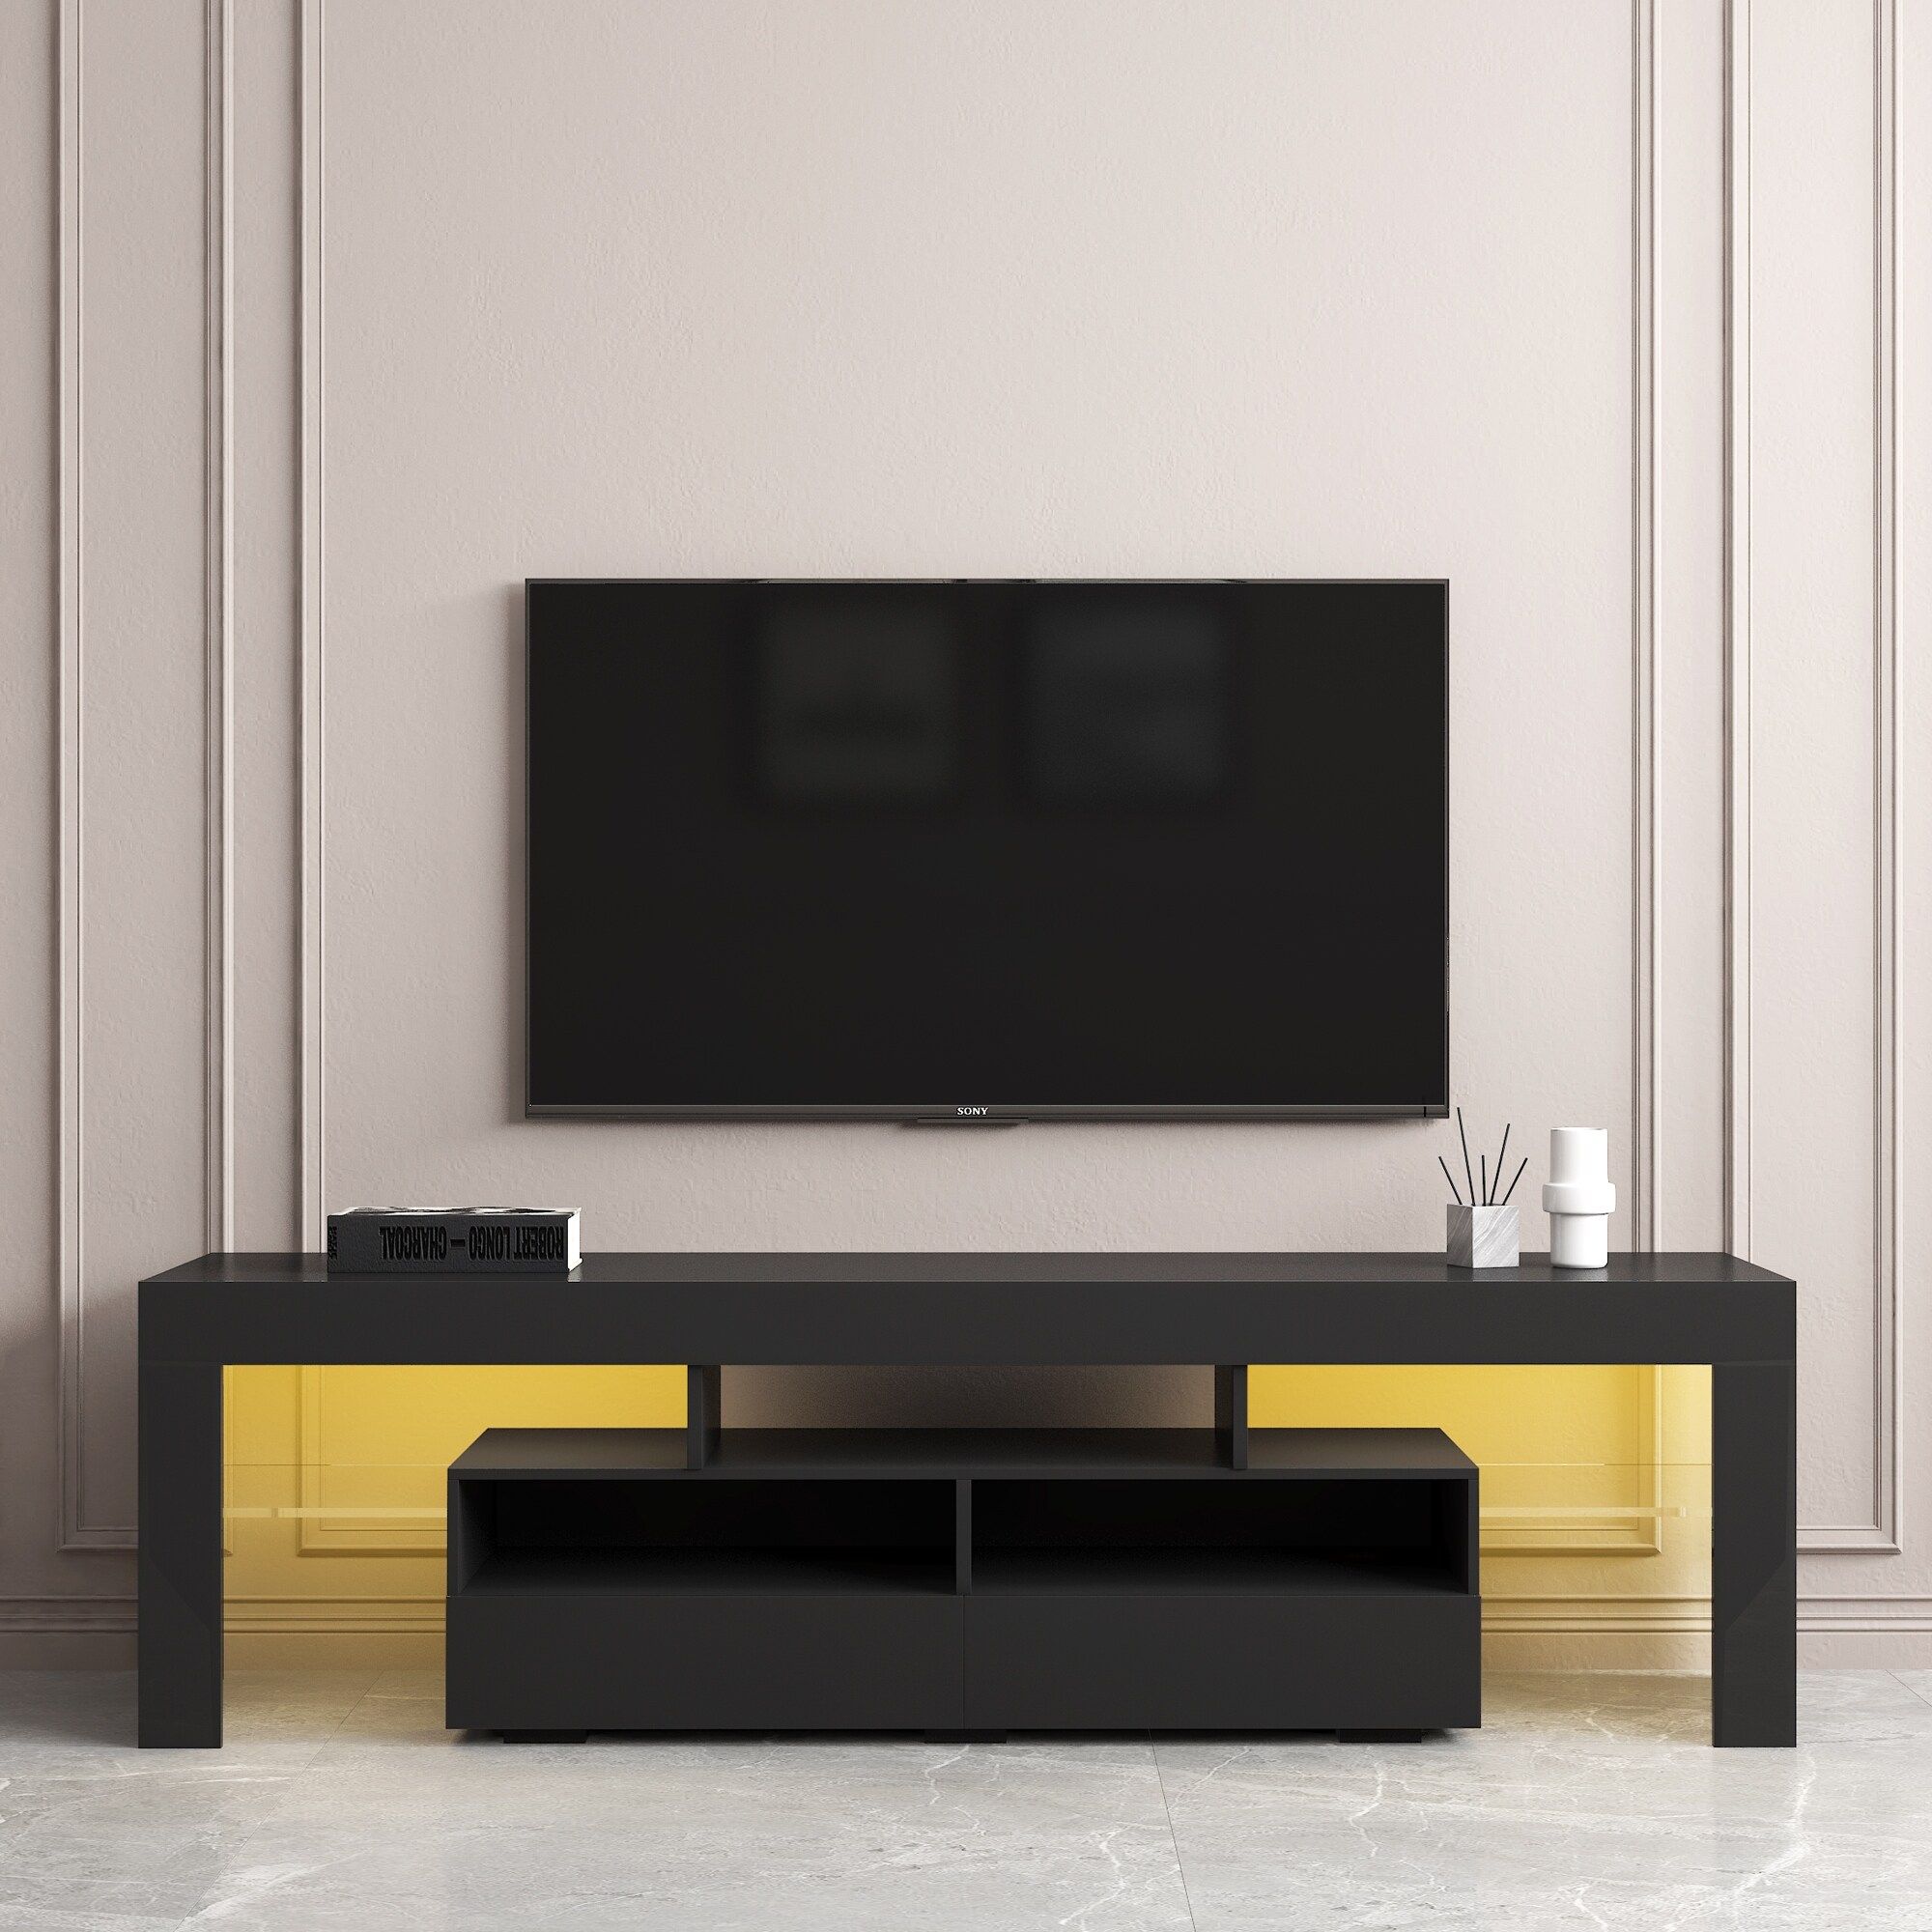 Modern Tv Stand With 2 Drawers, 2 Open Shelves And Rgb Led Lights – 63"  Black Cabinet For Living Room – Bed Bath & Beyond – 37530008 Within Rgb Entertainment Centers Black (View 12 of 15)